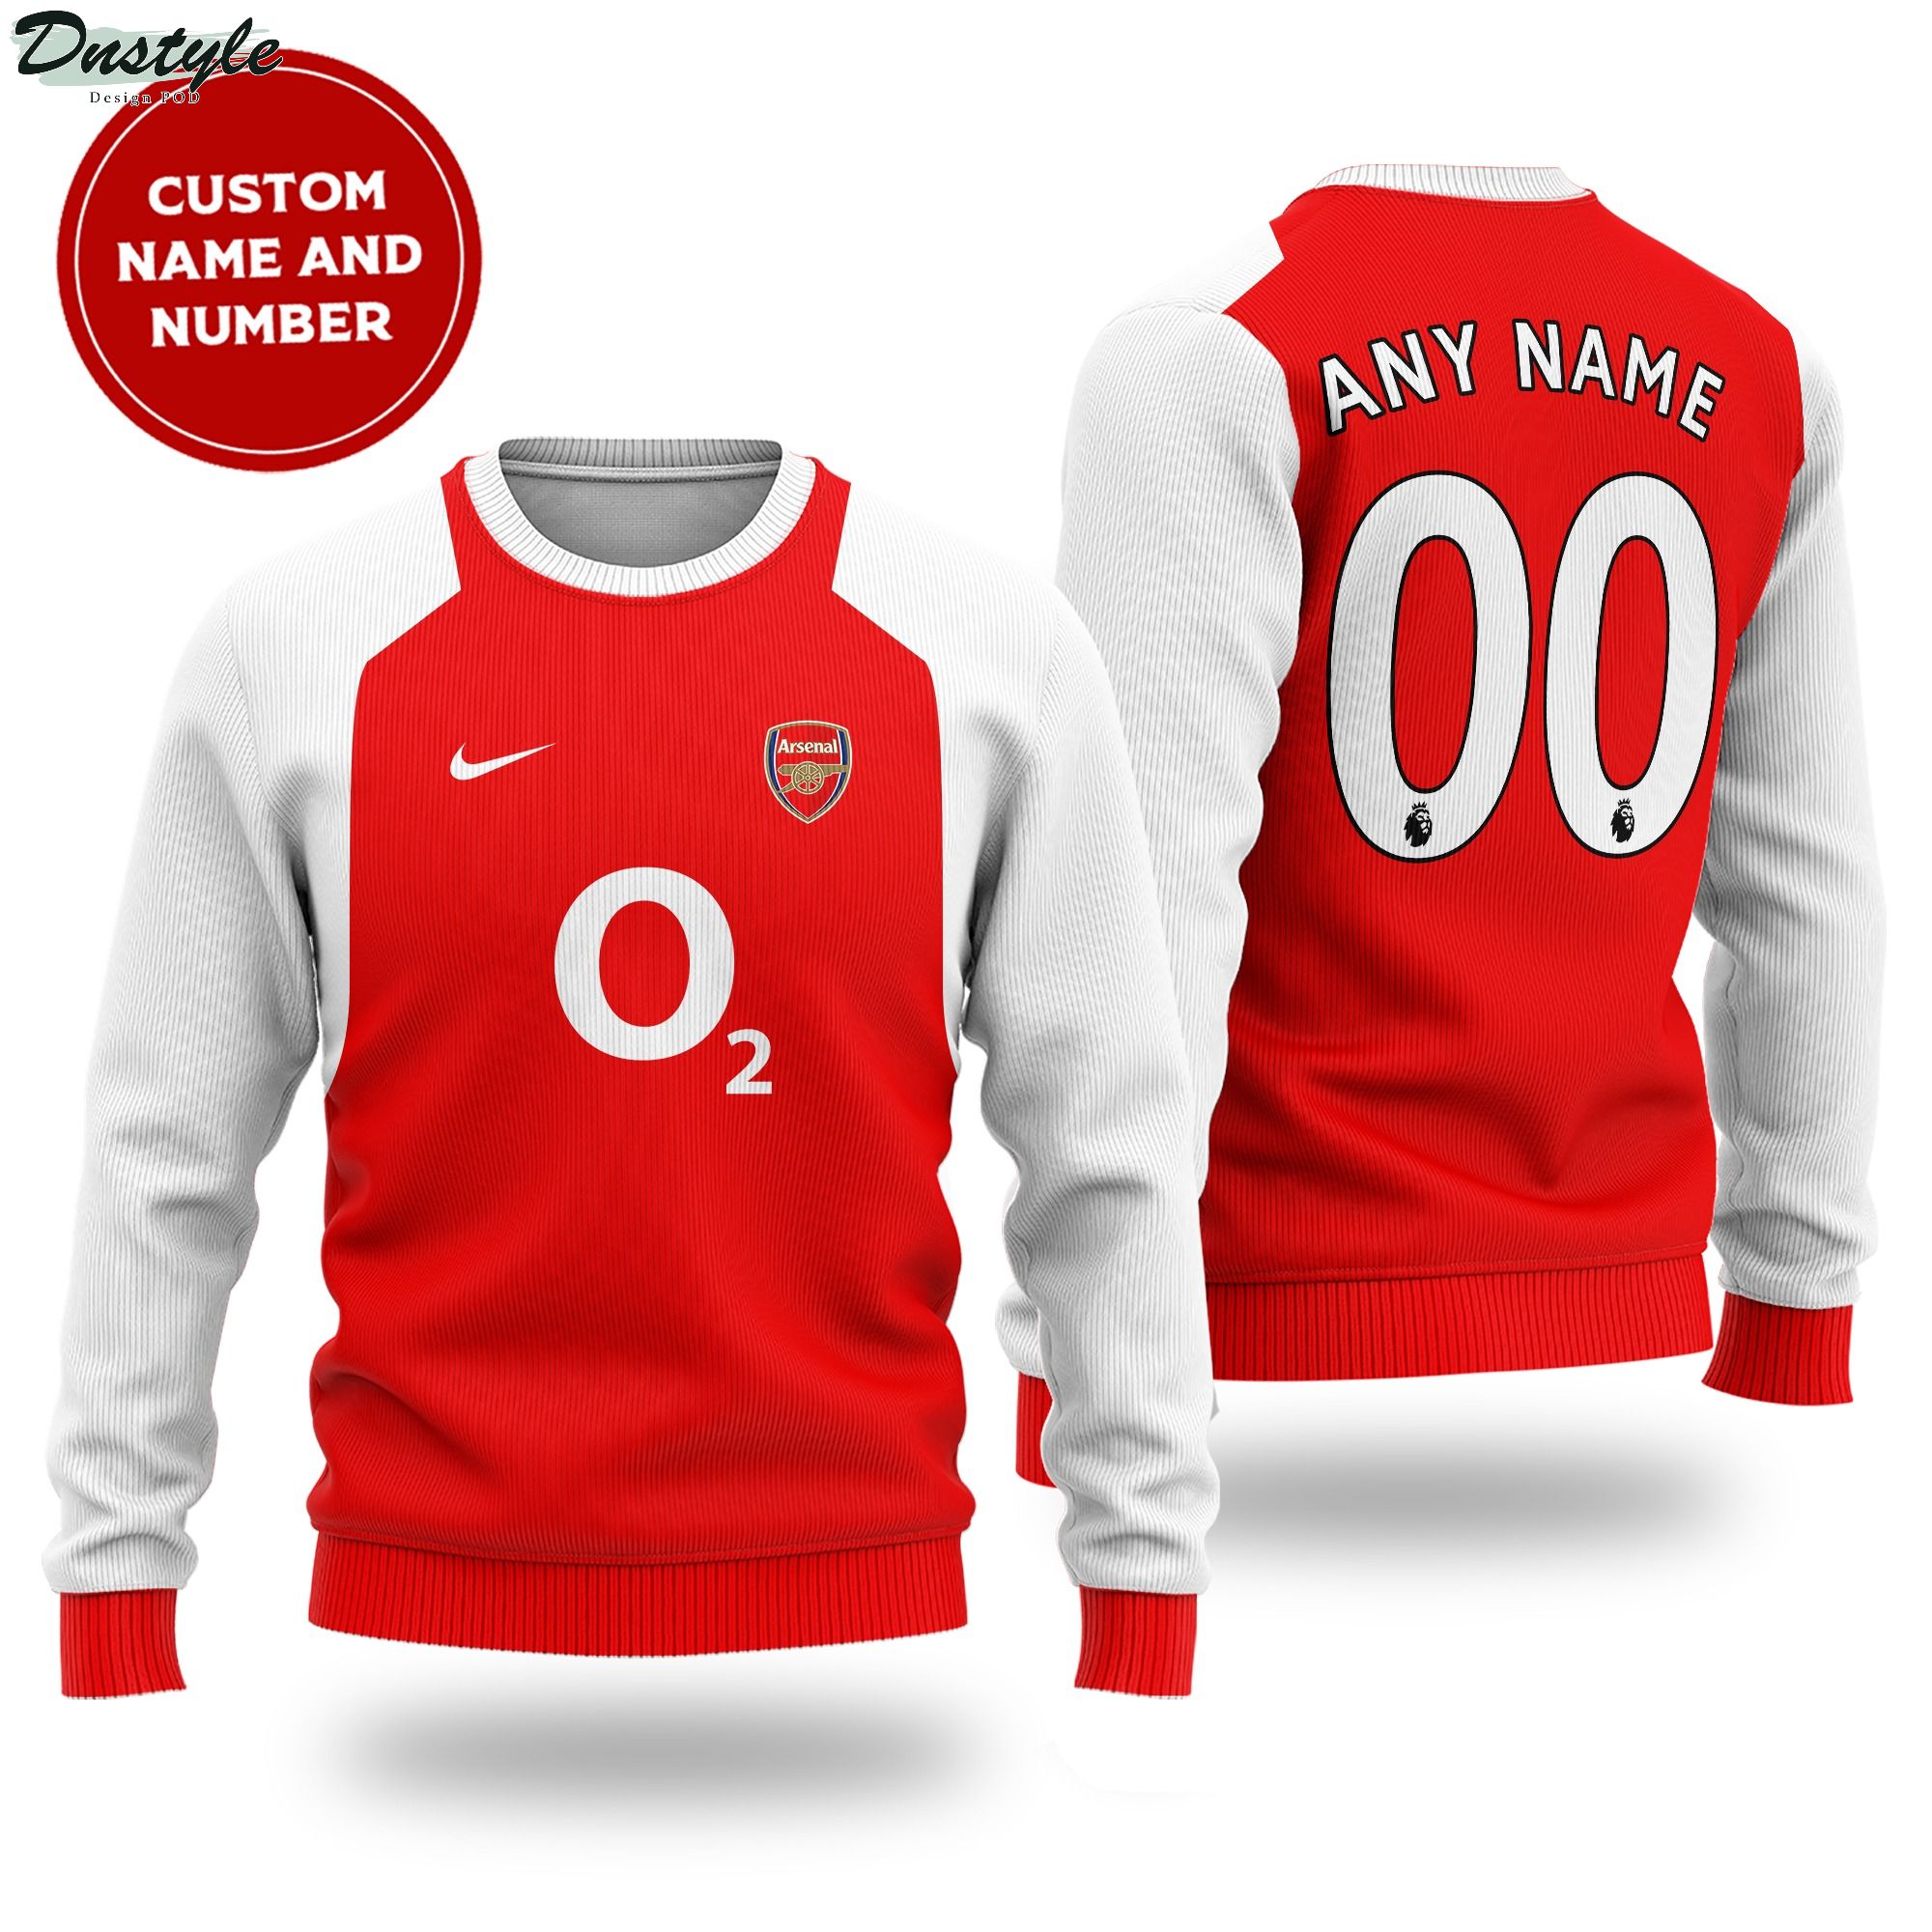 Arsenal O2 custom name and number ugly sweater